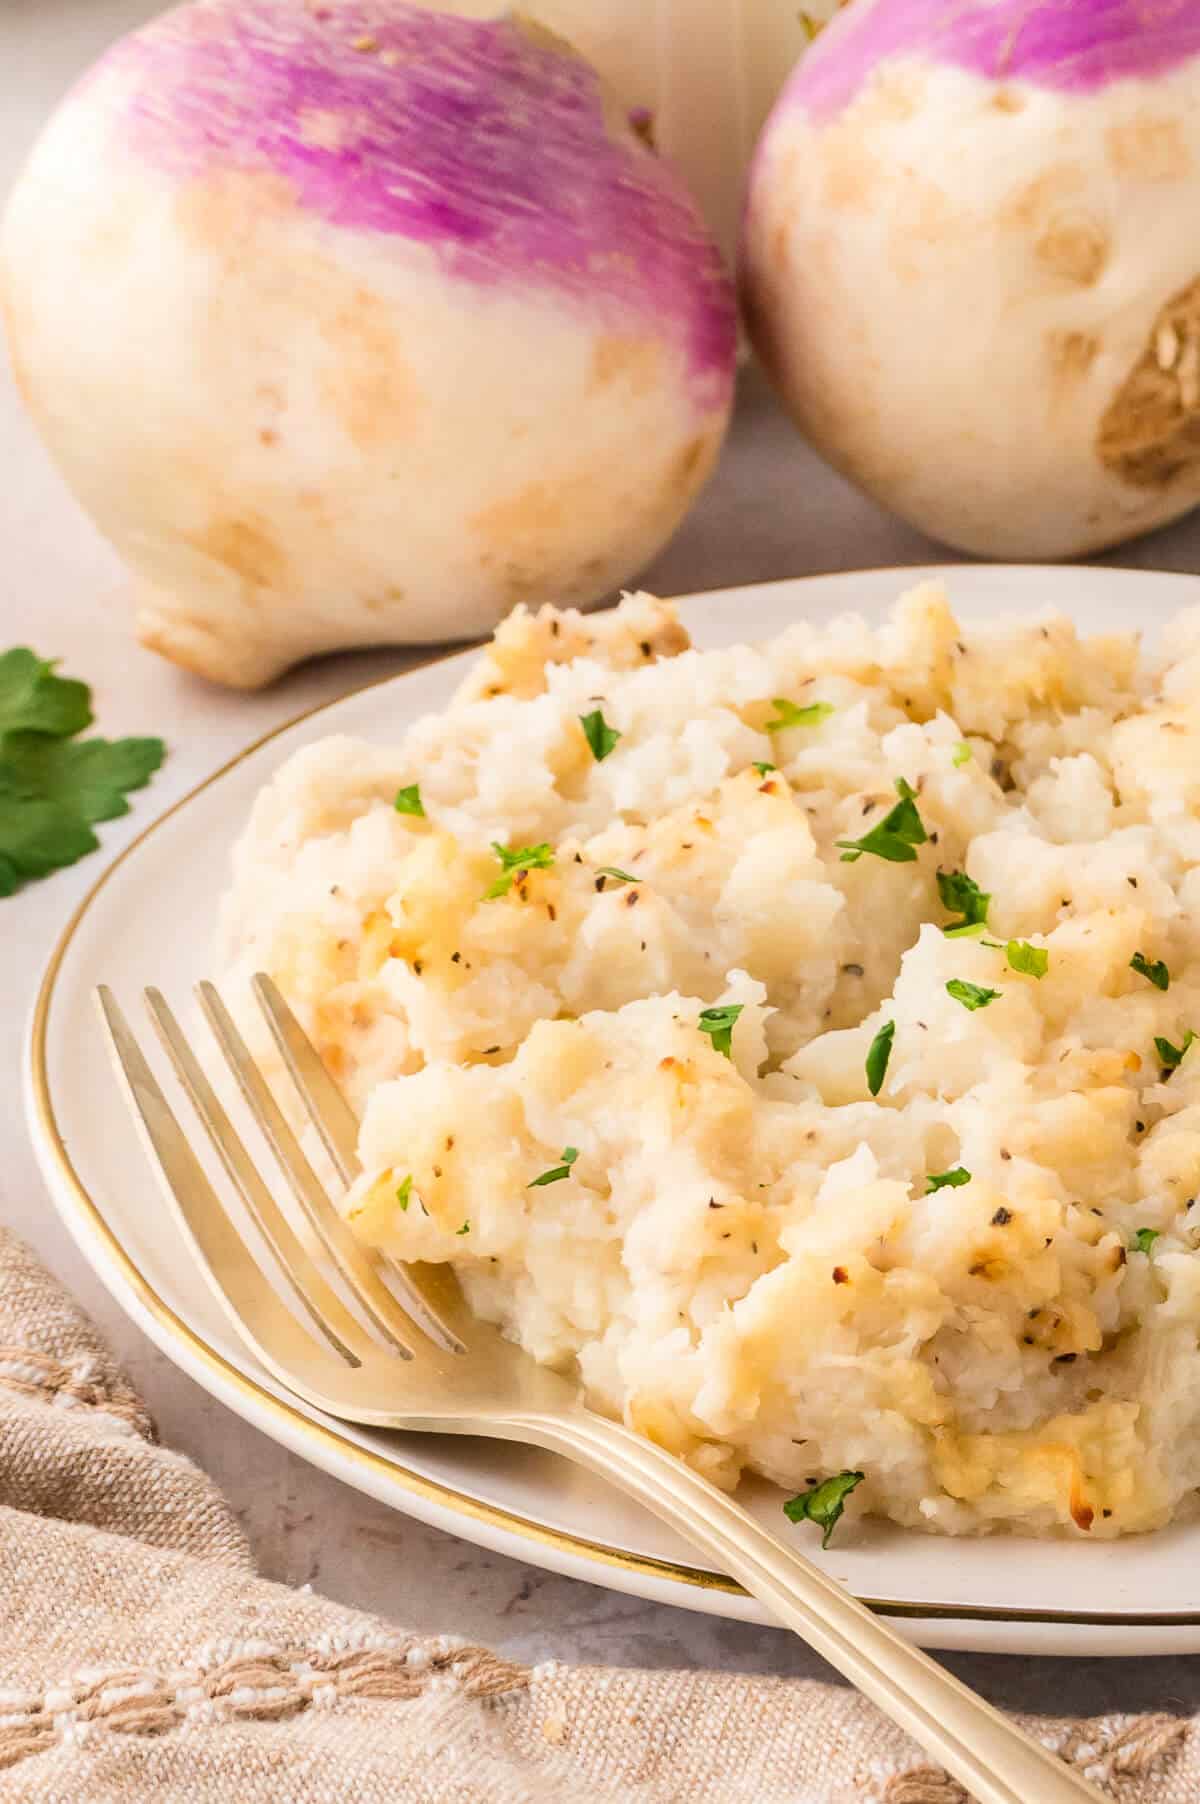 Turnip casserole on a plate with a fork.